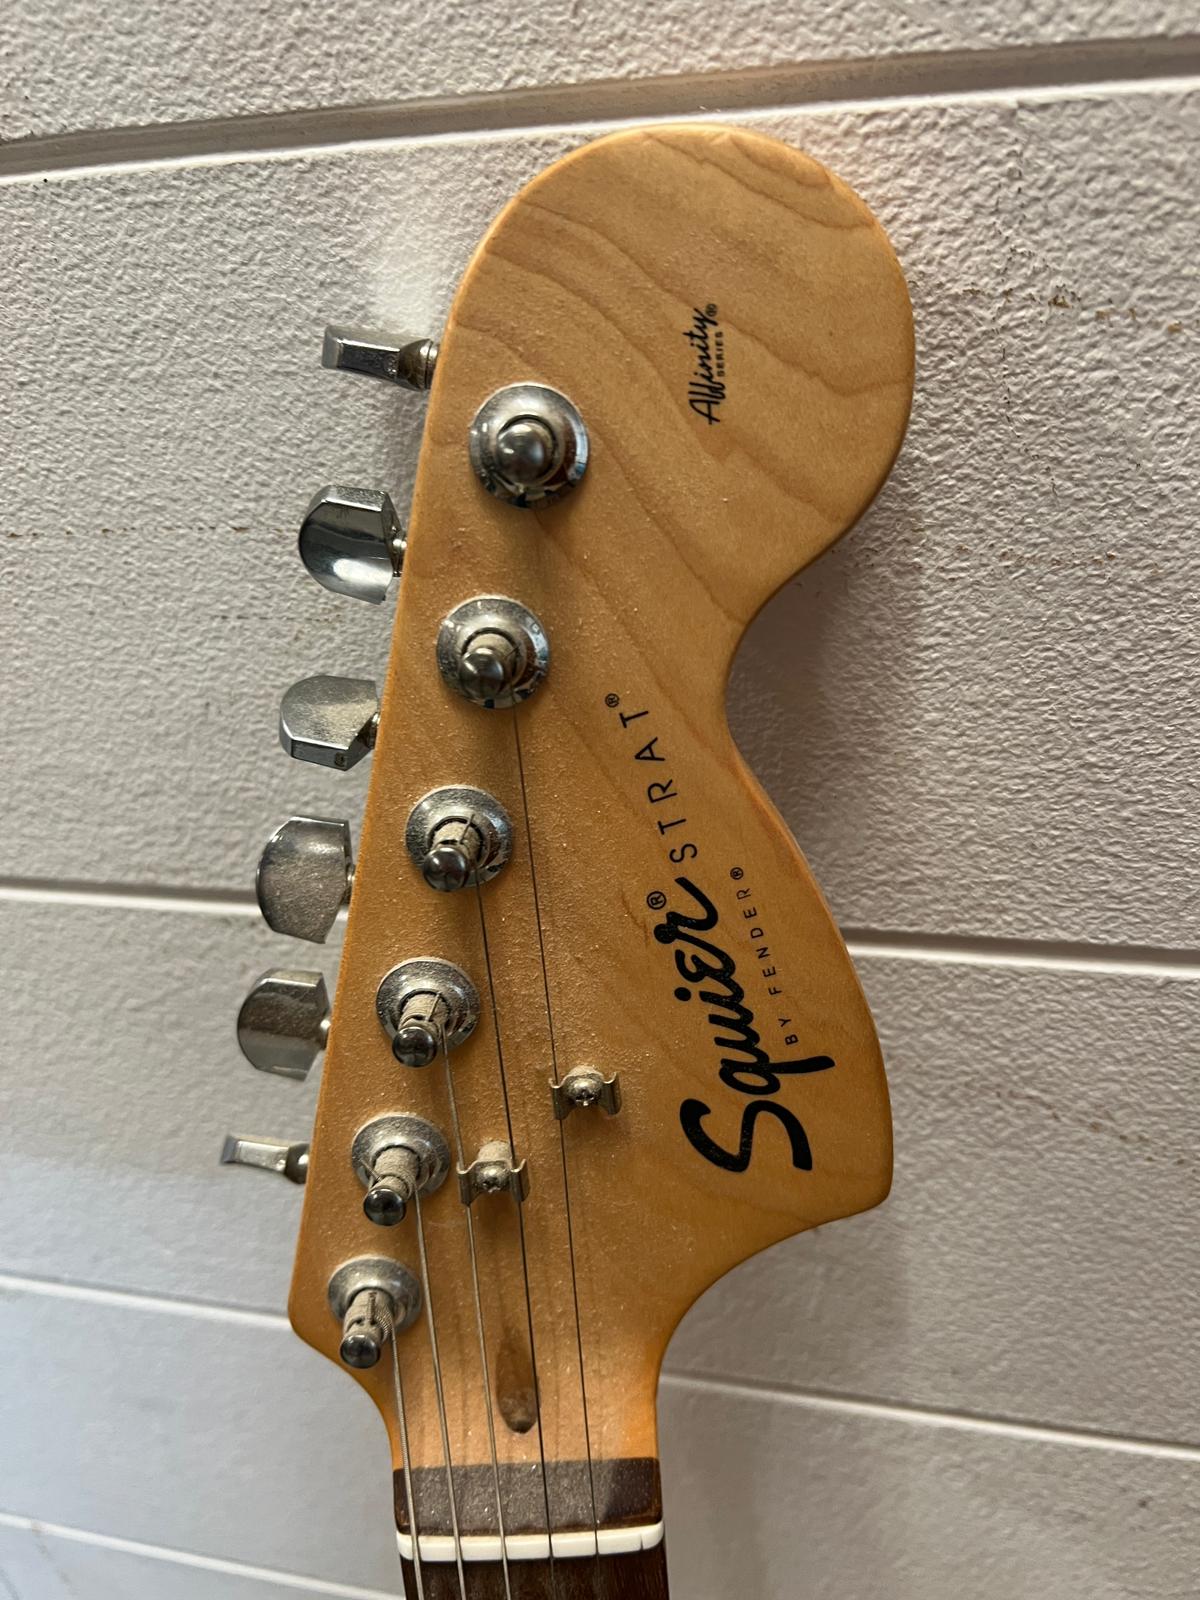 A Squier Strat electric guitar, Affinity series - Image 2 of 4